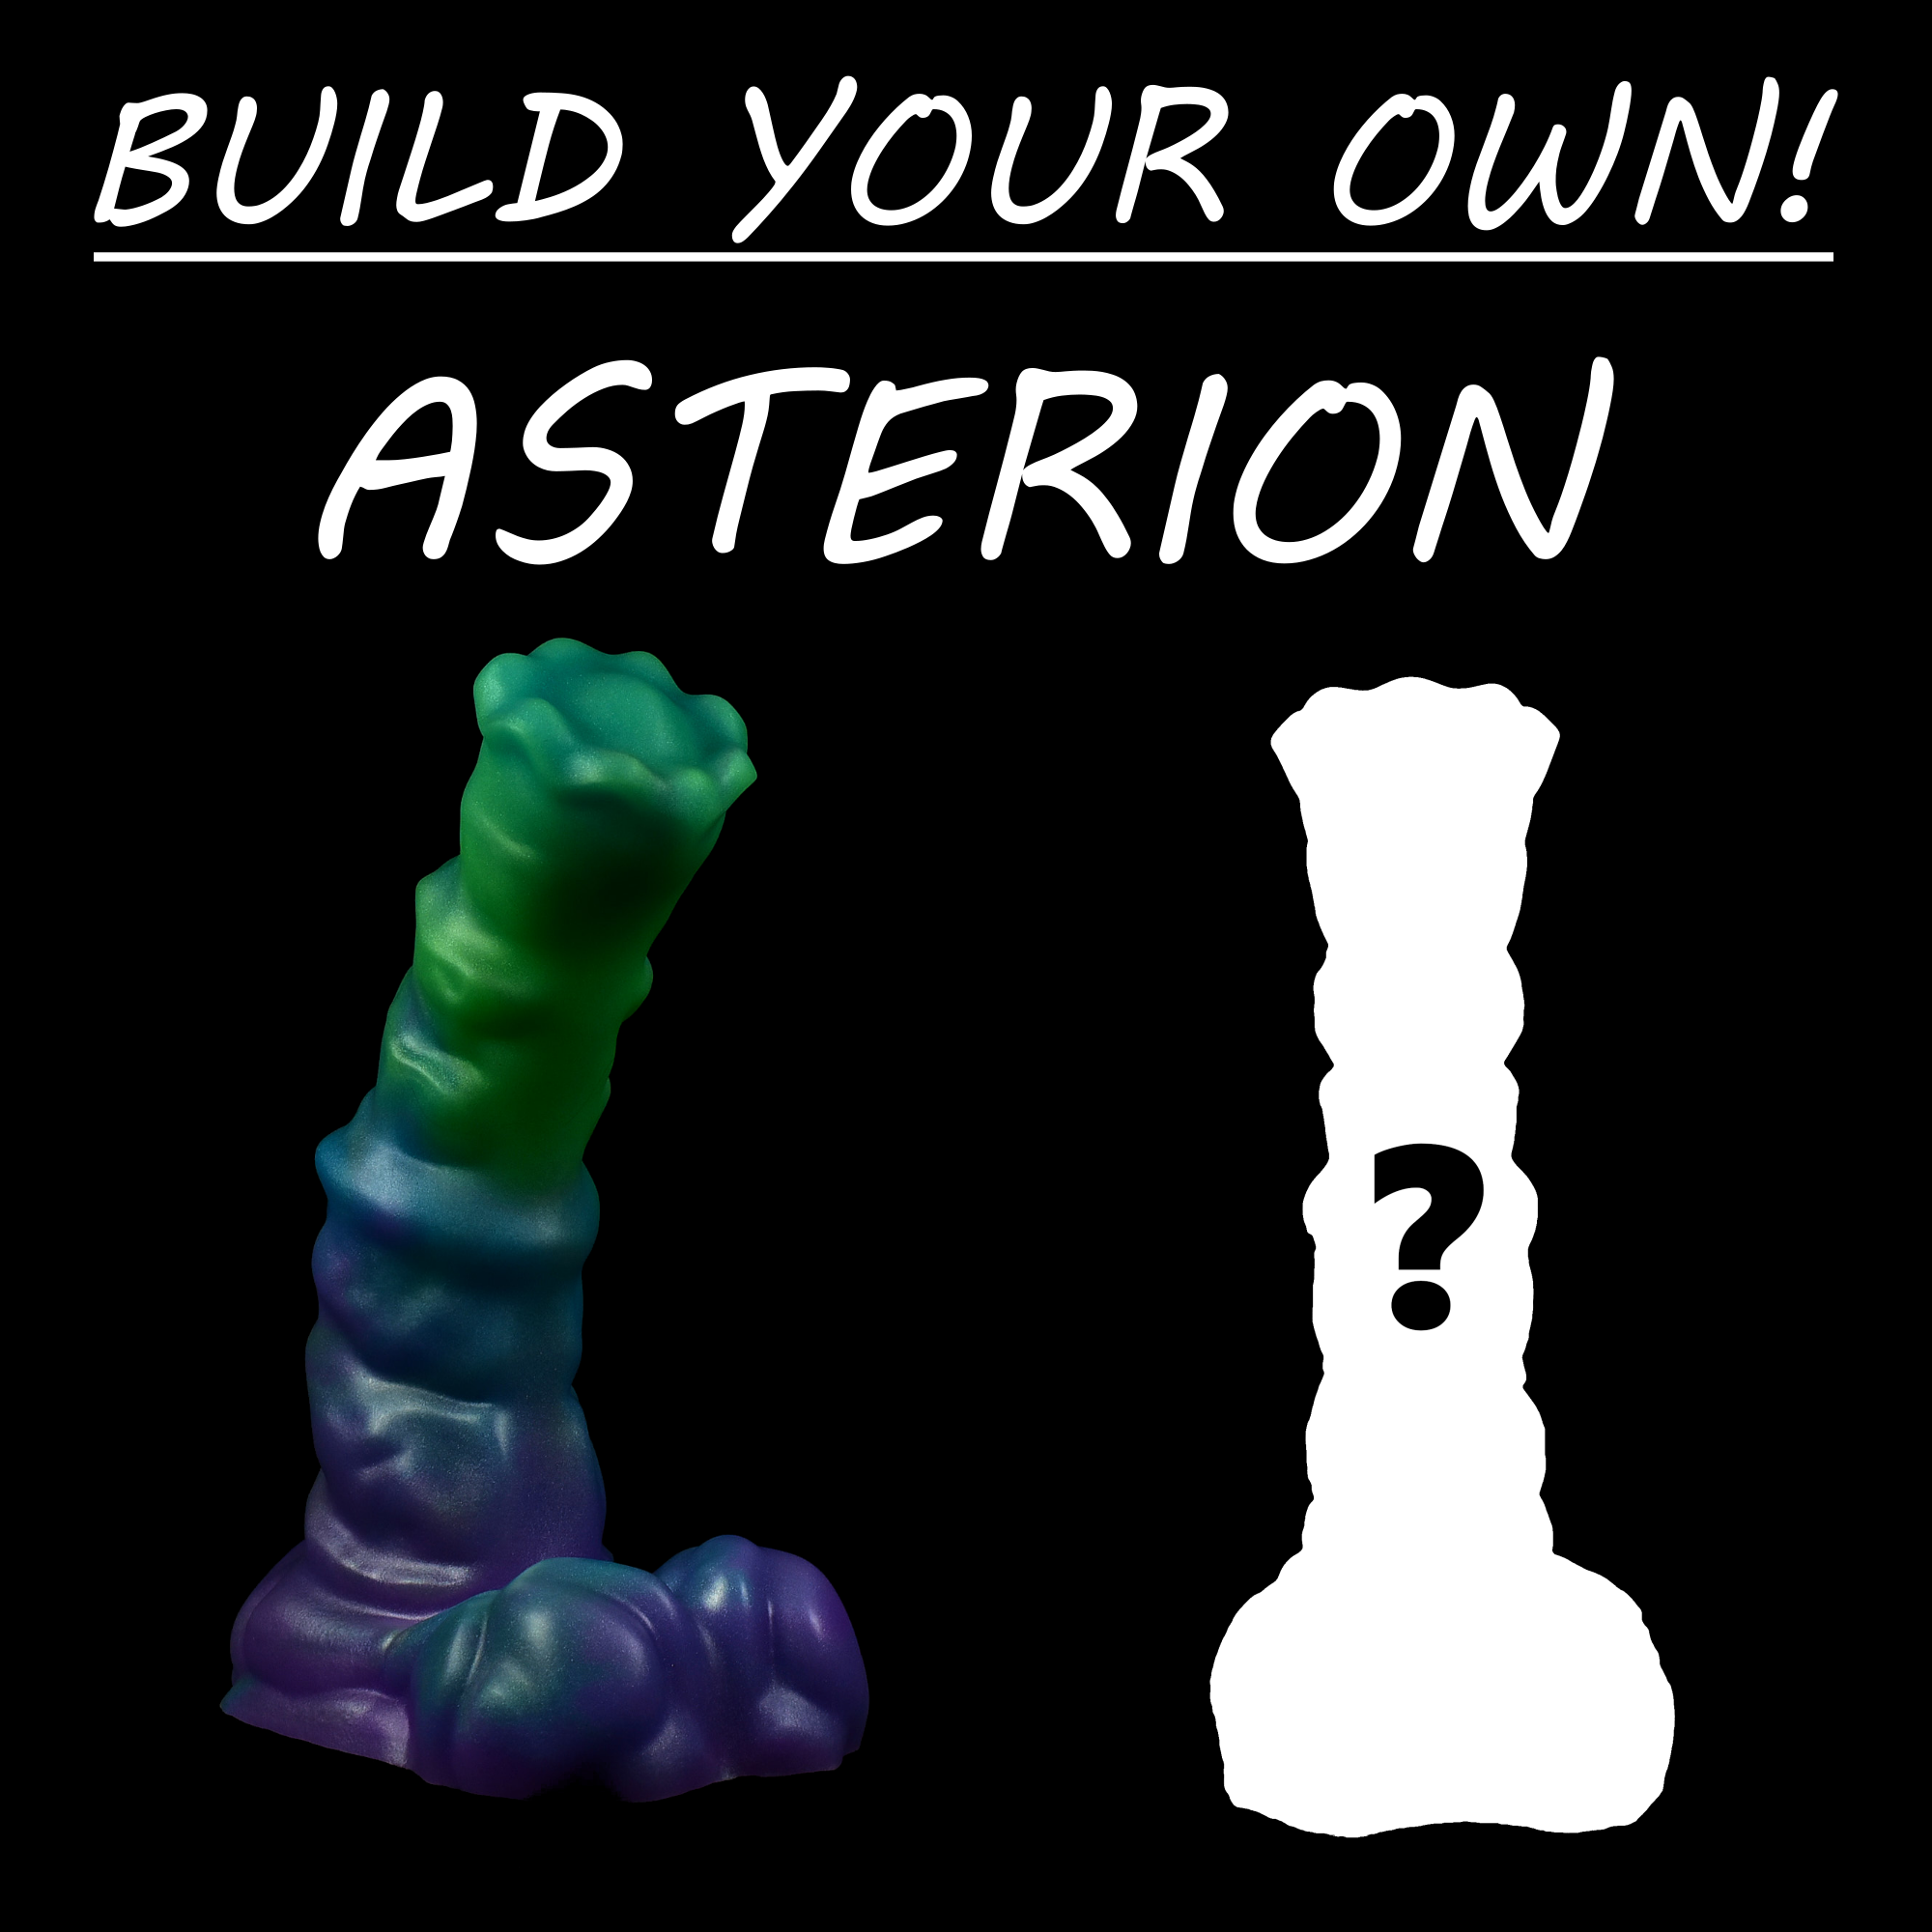 Build Your Own Asterion